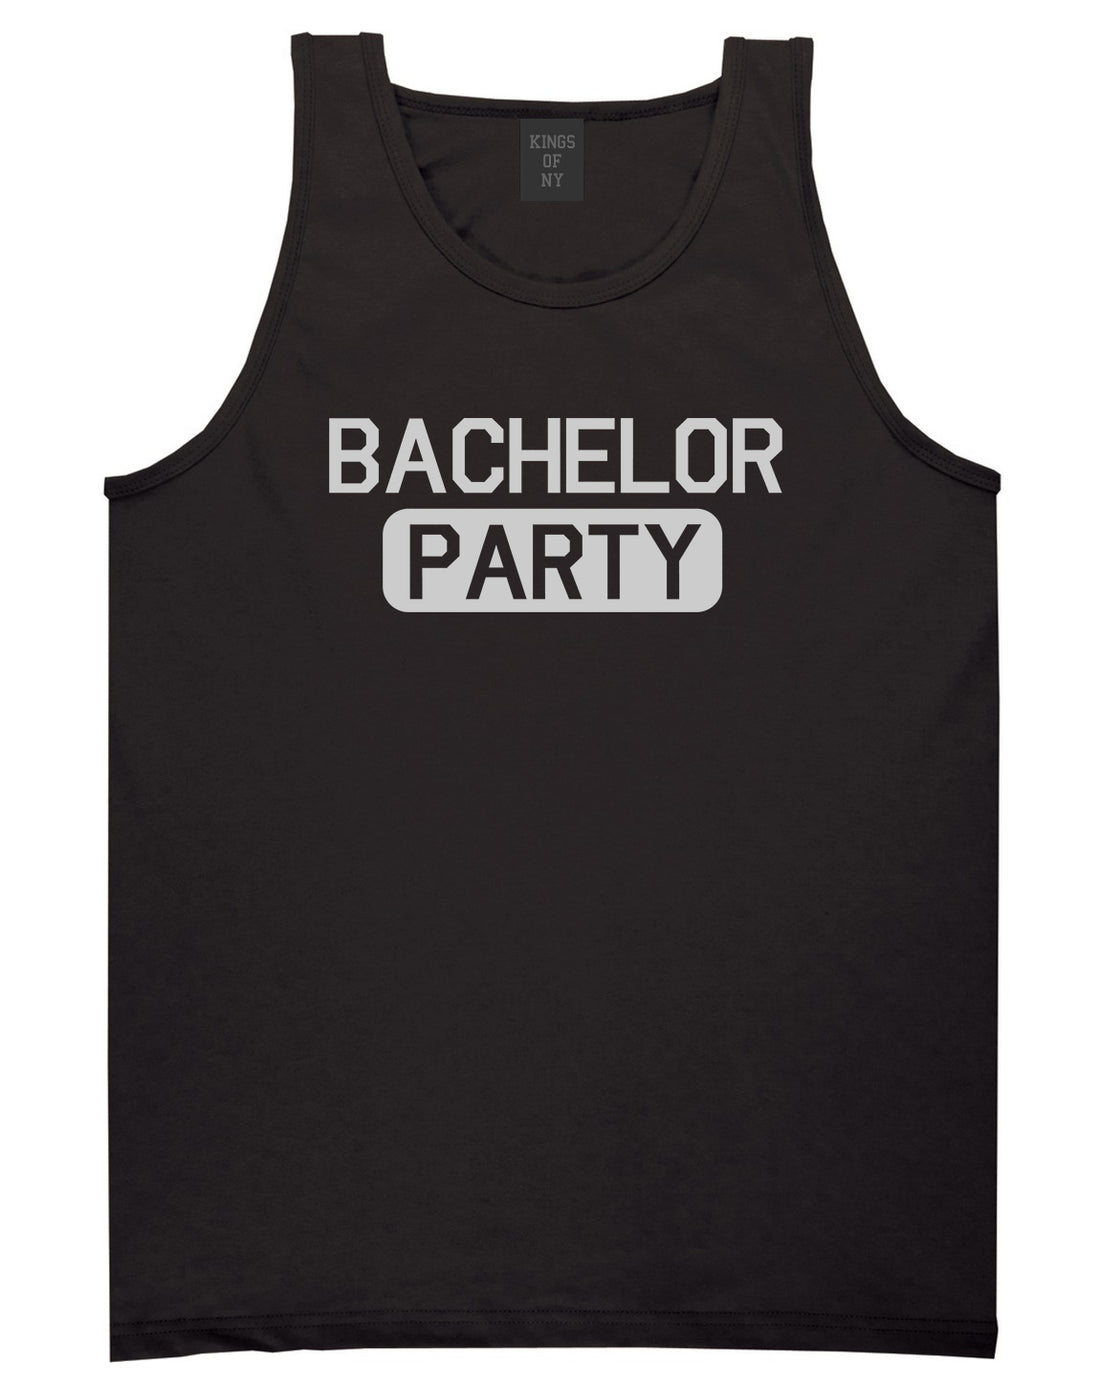 Bachelor Party Black Tank Top Shirt by Kings Of NY